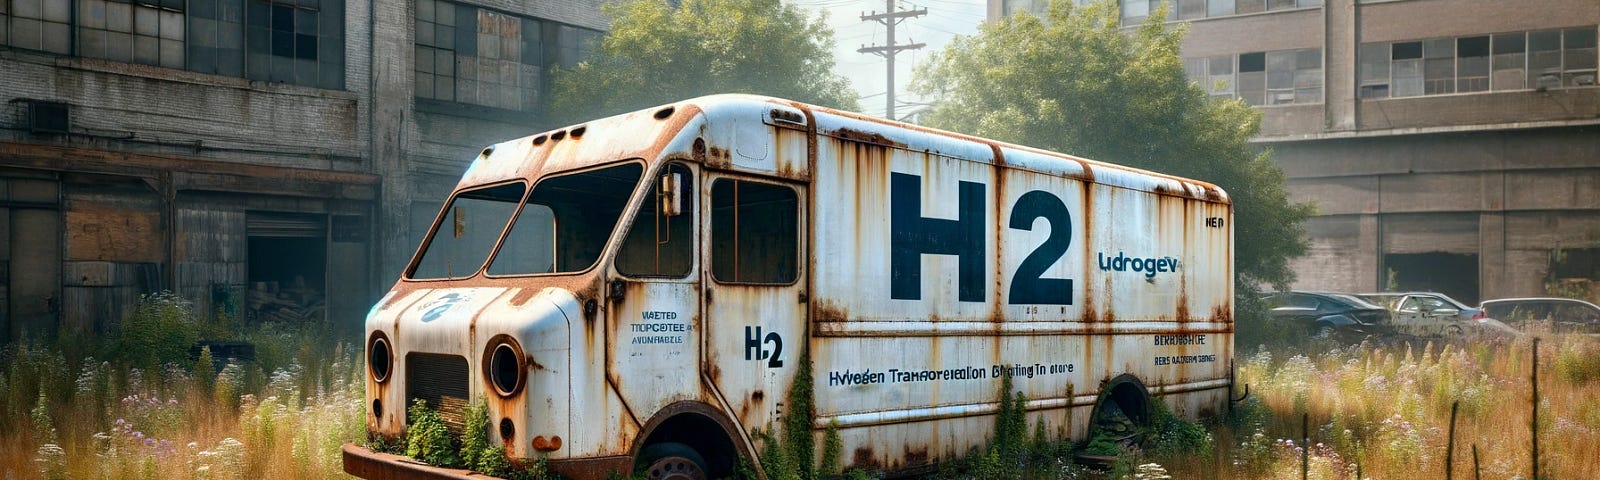 ChatGPT & DALL-E generated panoramic image depicting a large delivery van, labeled “H2,” abandoned and rusting in a weed-filled lot.